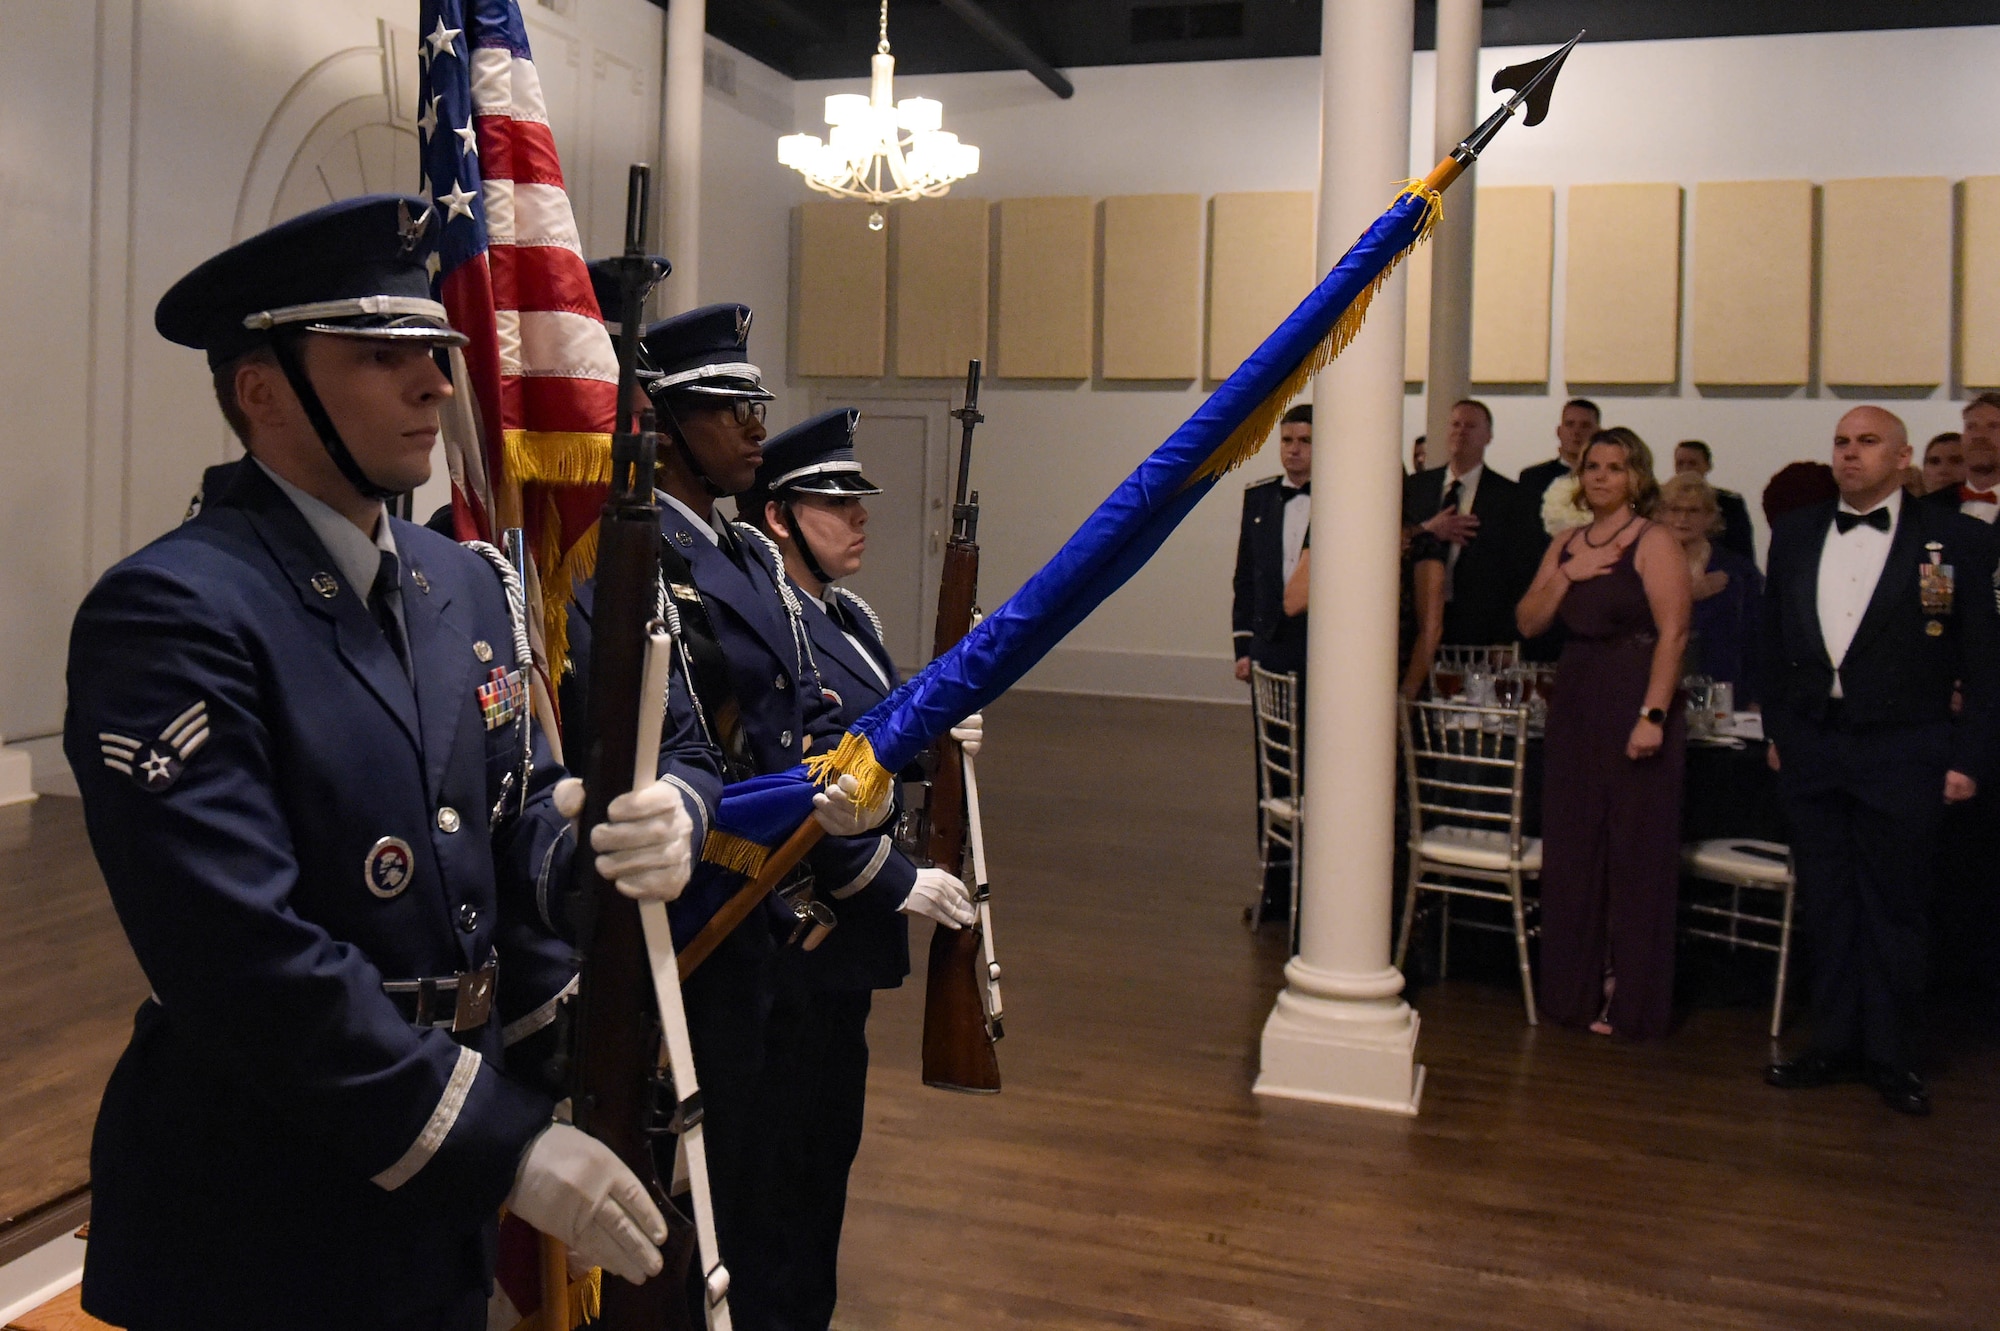 A photo of honor guard.